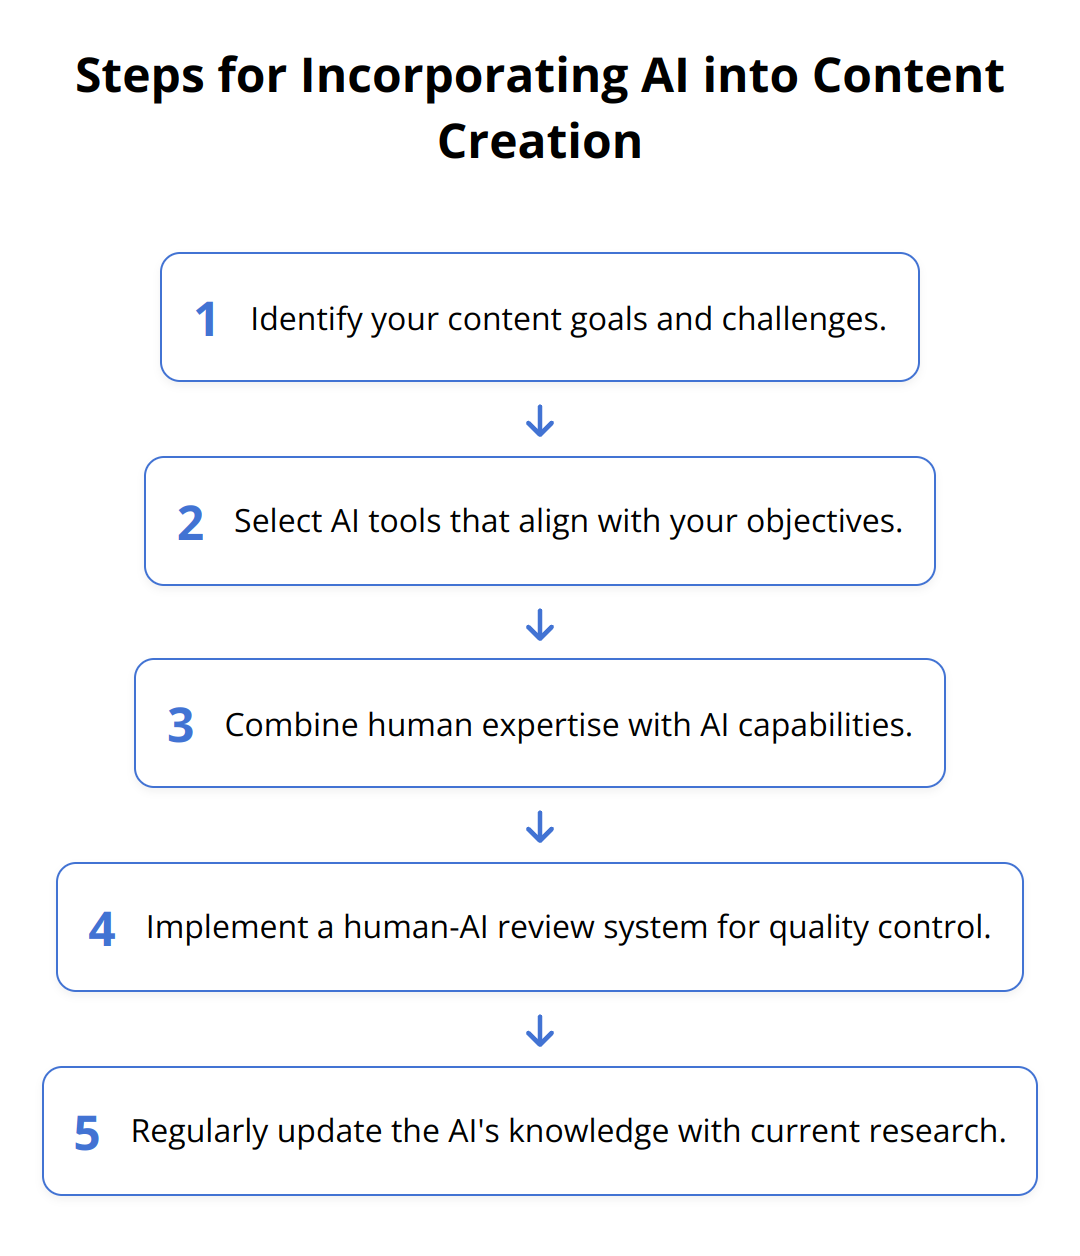 Flow Chart - Steps for Incorporating AI into Content Creation